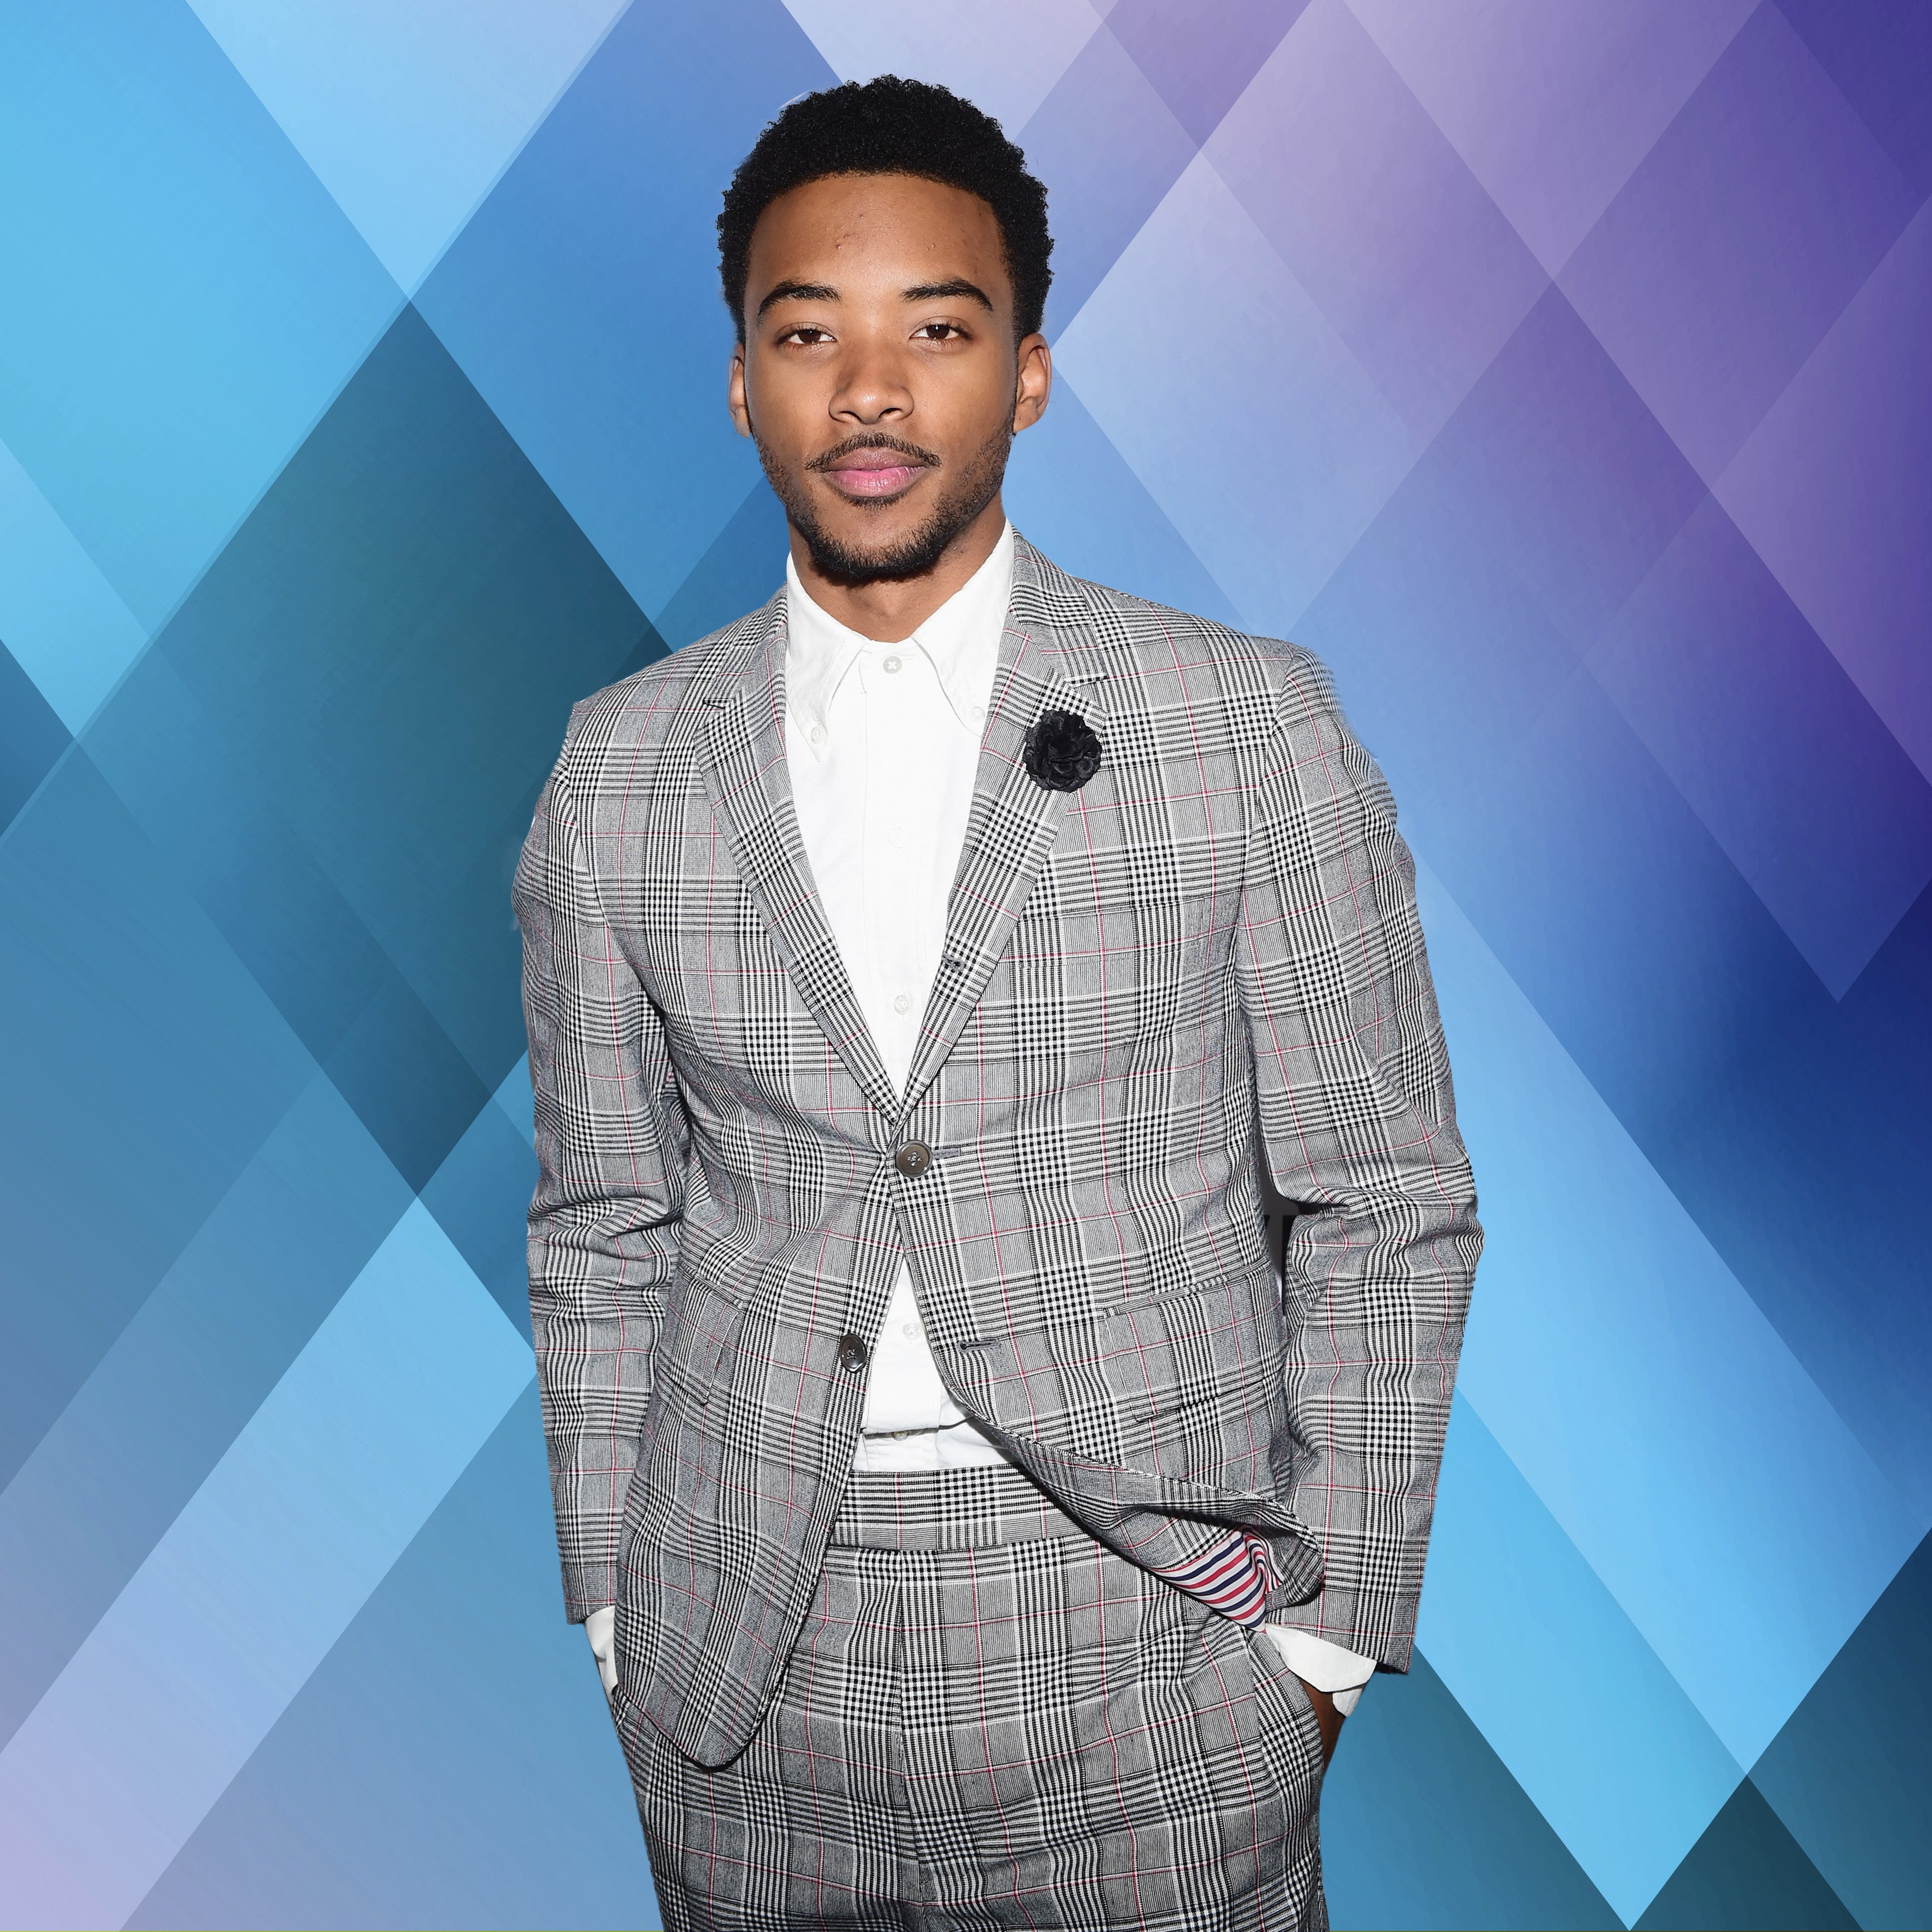 Algee Smith On 'Detroit': It's An Example Of When 'Years of Oppression Is Stored Up'
